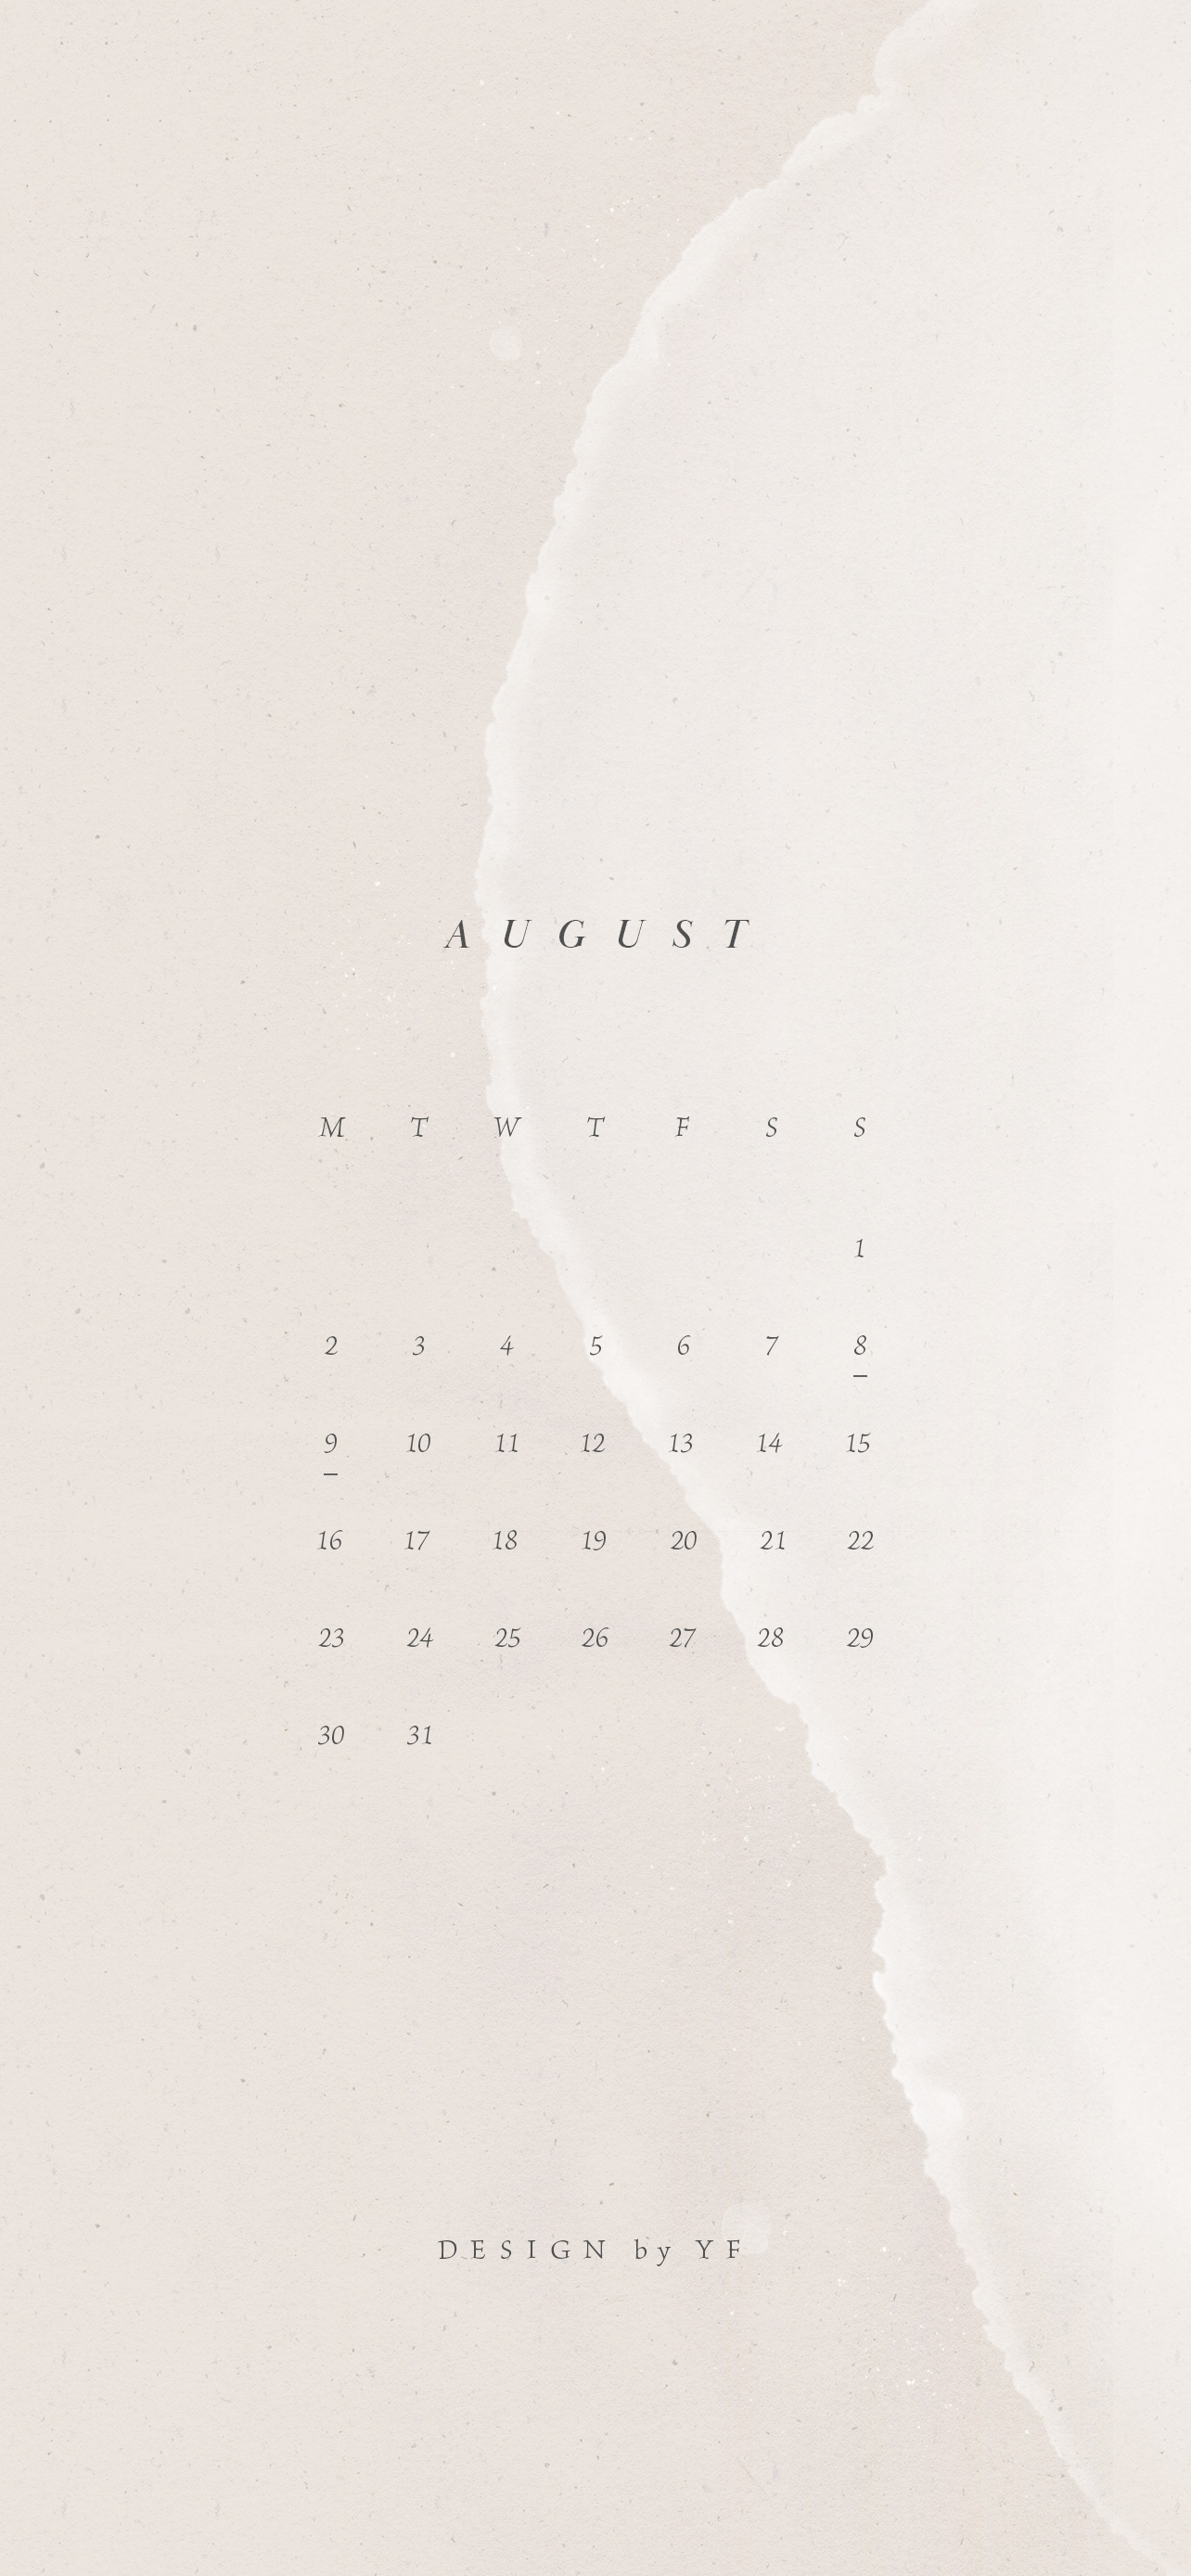 August 21 Calendar Wallpaper For The Iphone Design By Yf